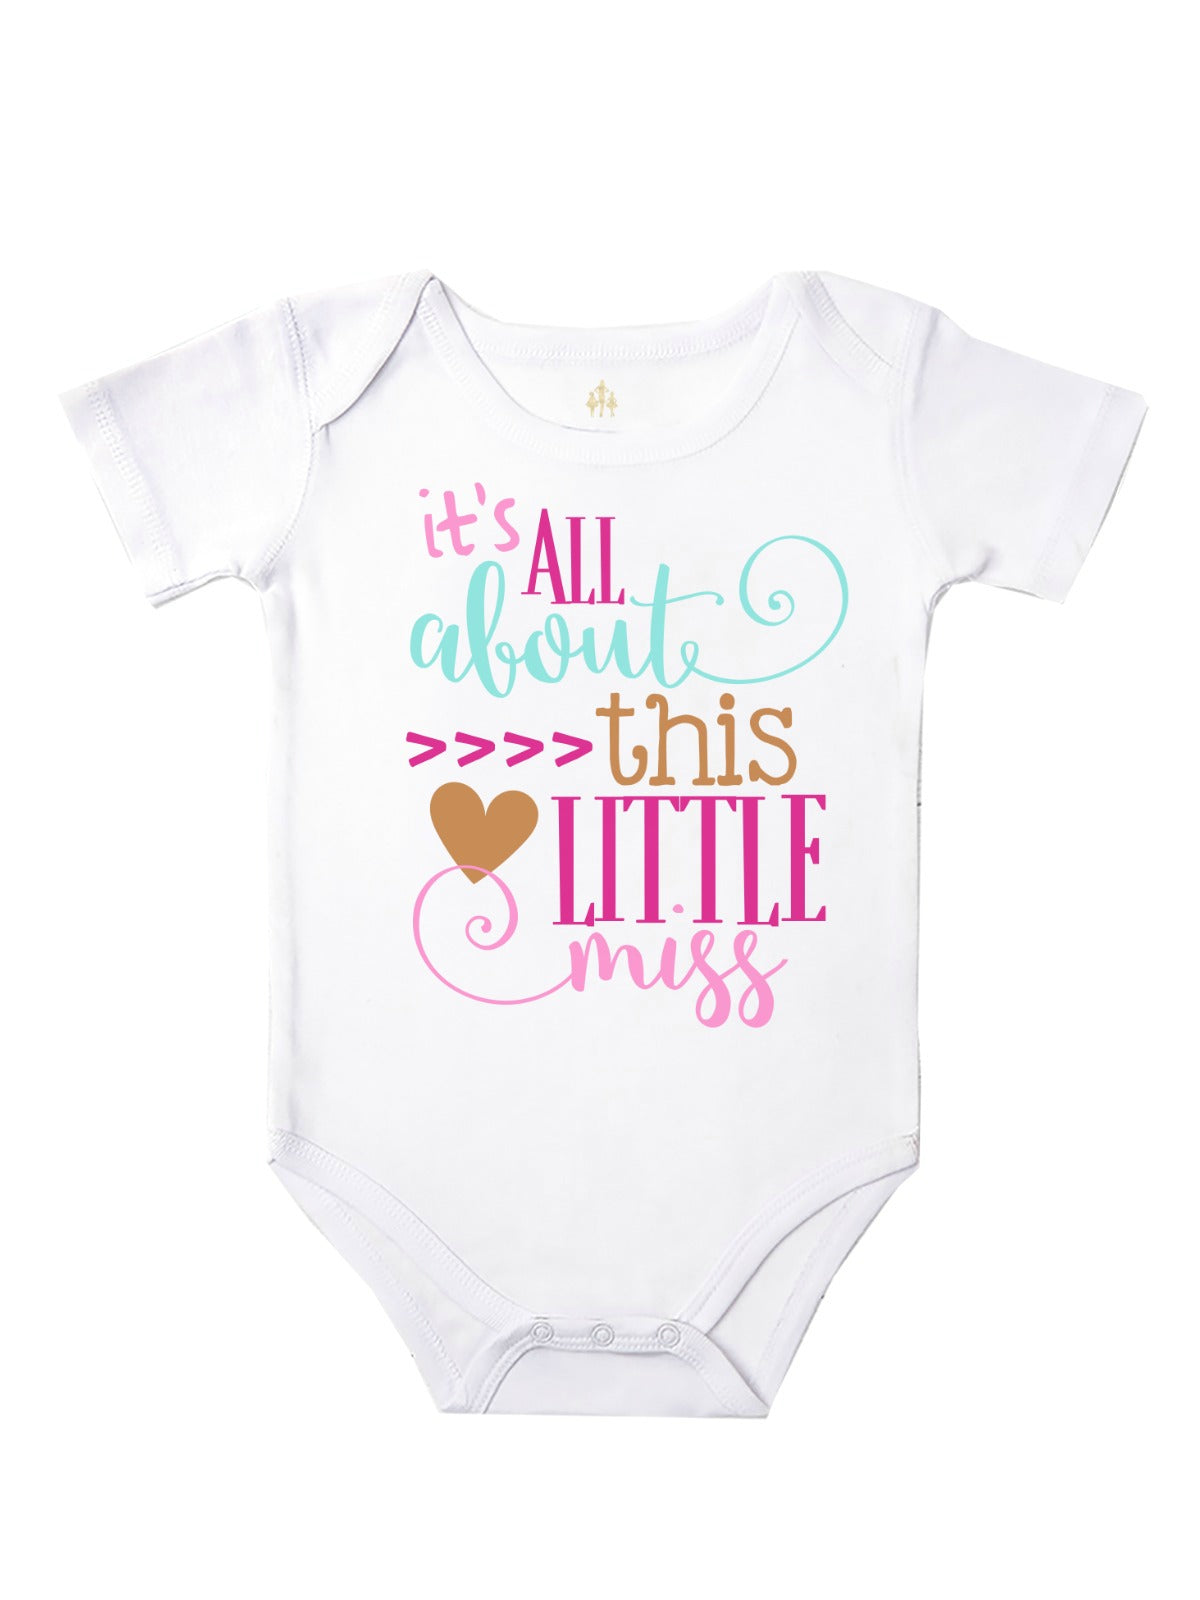 It's all about this little miss baby girl bodysuit in white